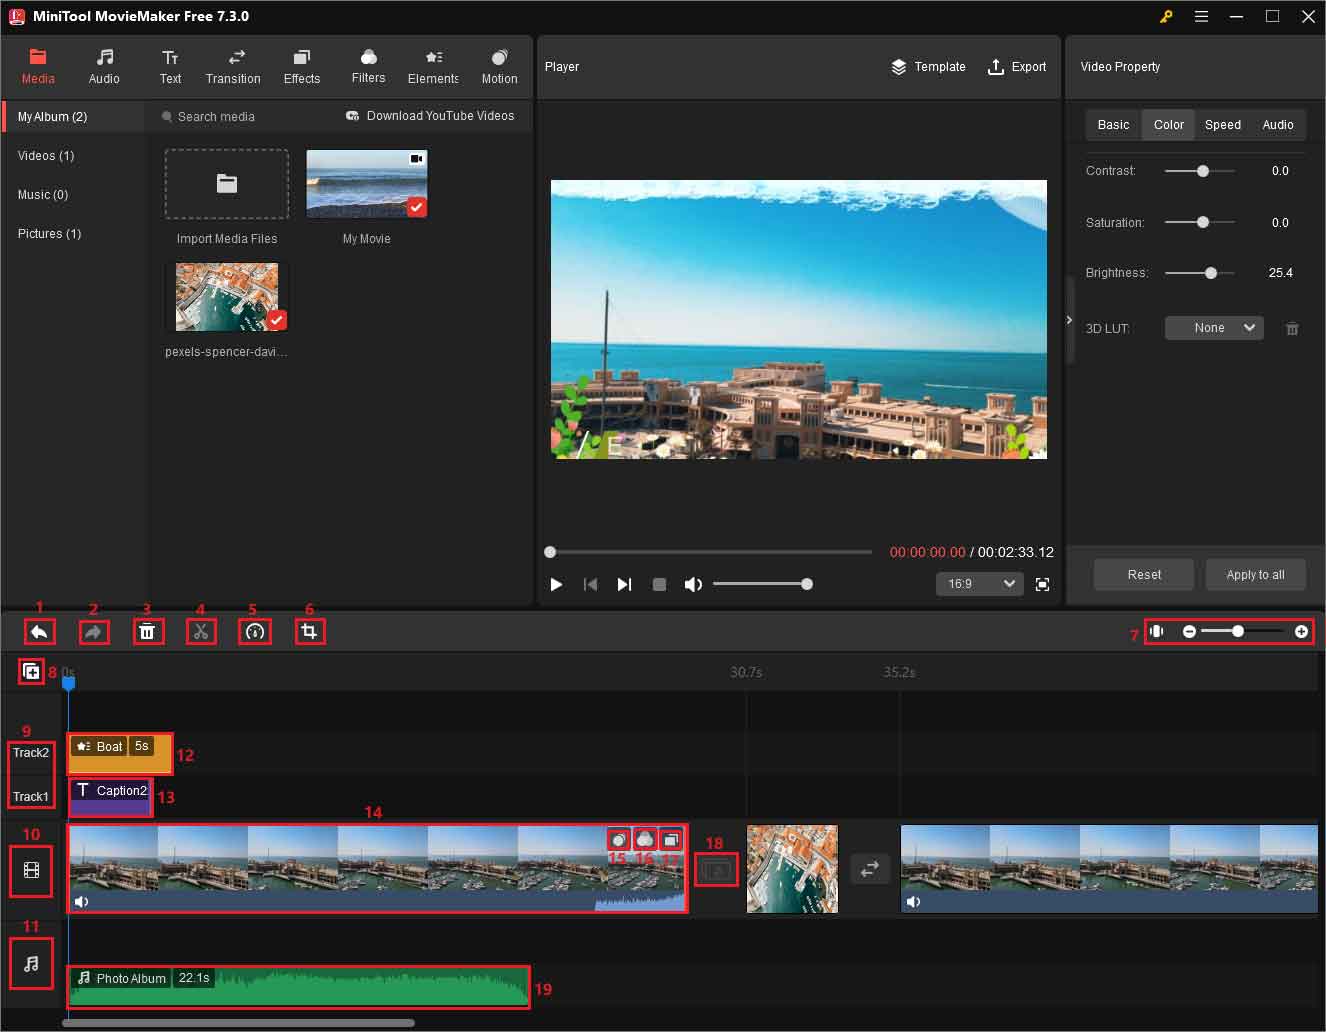 timeline section of MiniTool MovieMaker